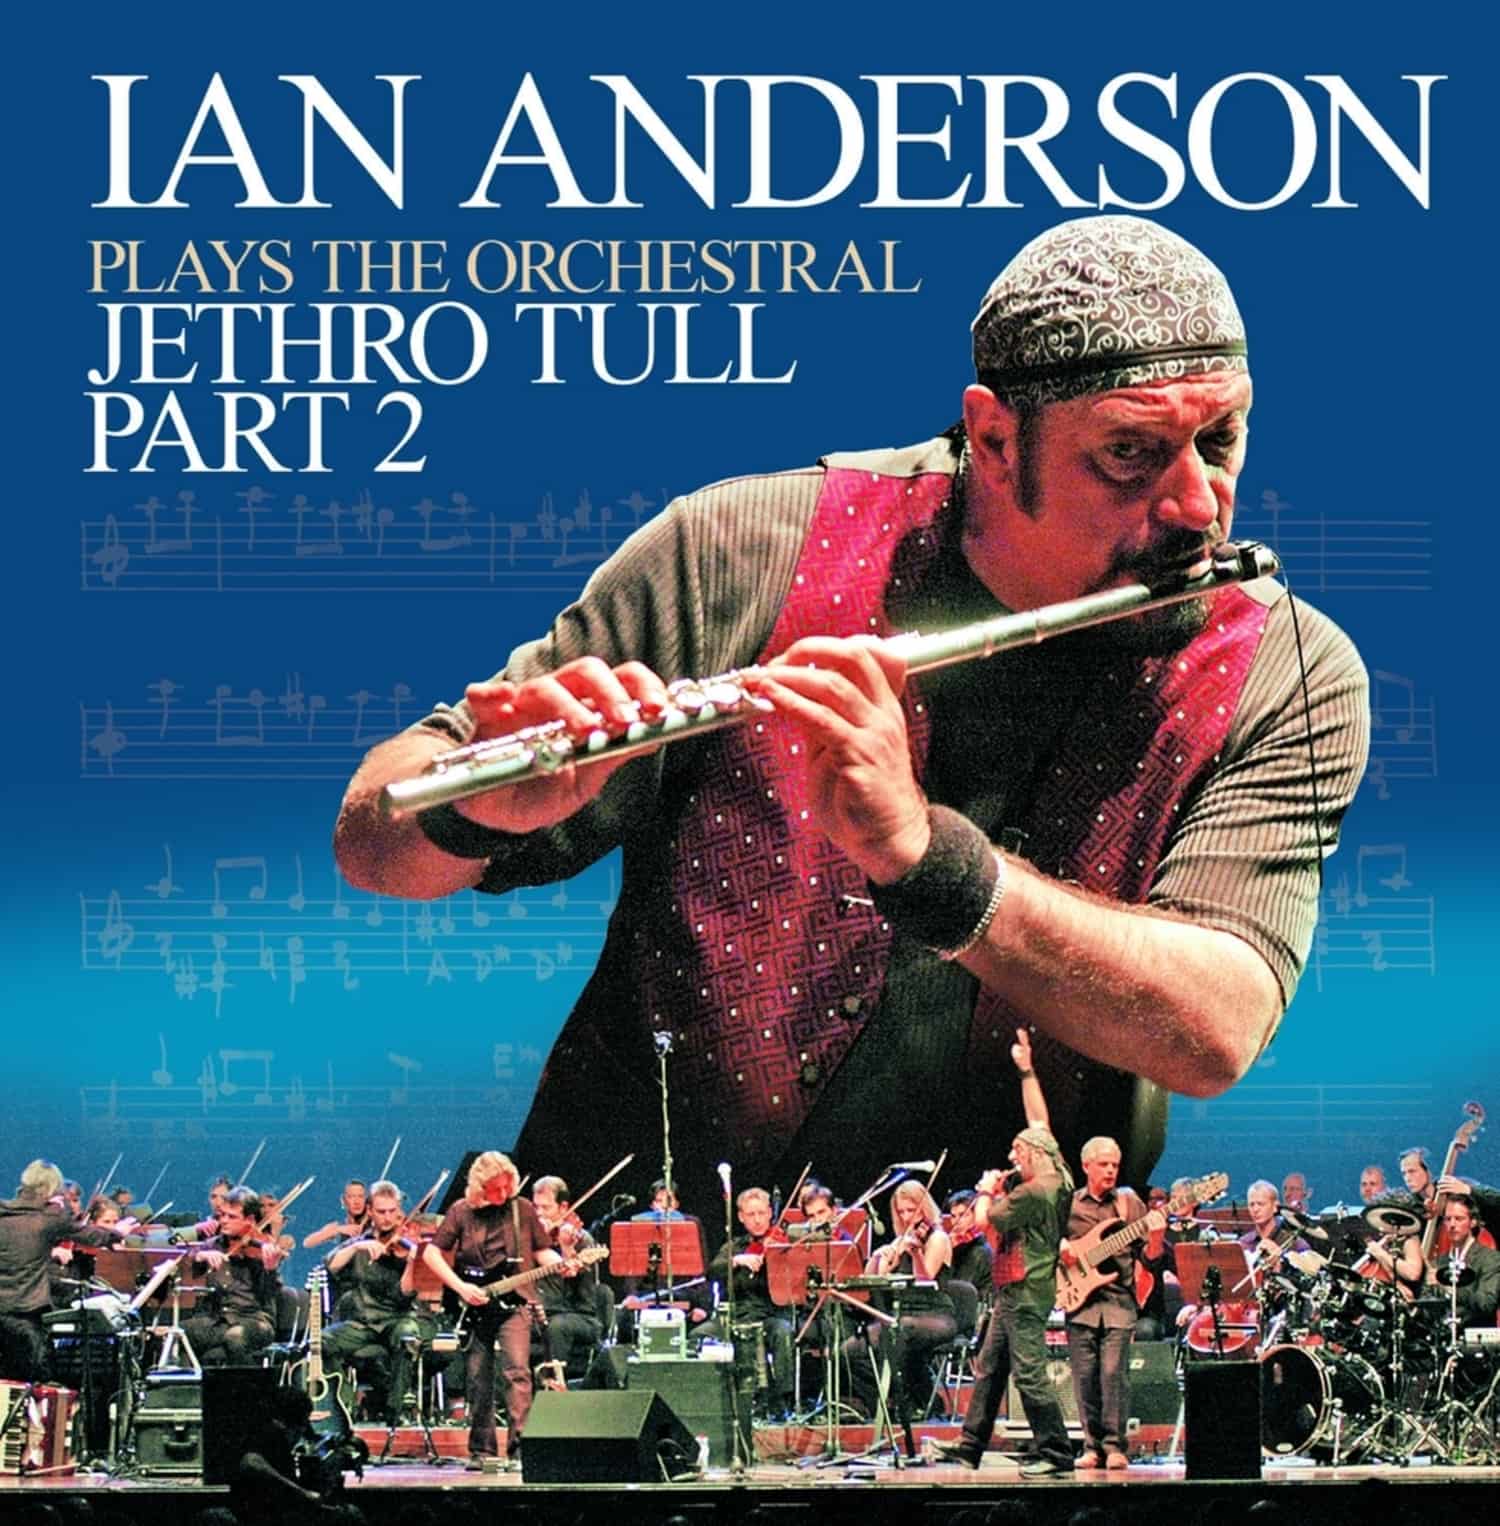 Ian Anderson - IAN ANDERSON PLAYS THE ORCHESTRAL JETHRO TULL PT.2 